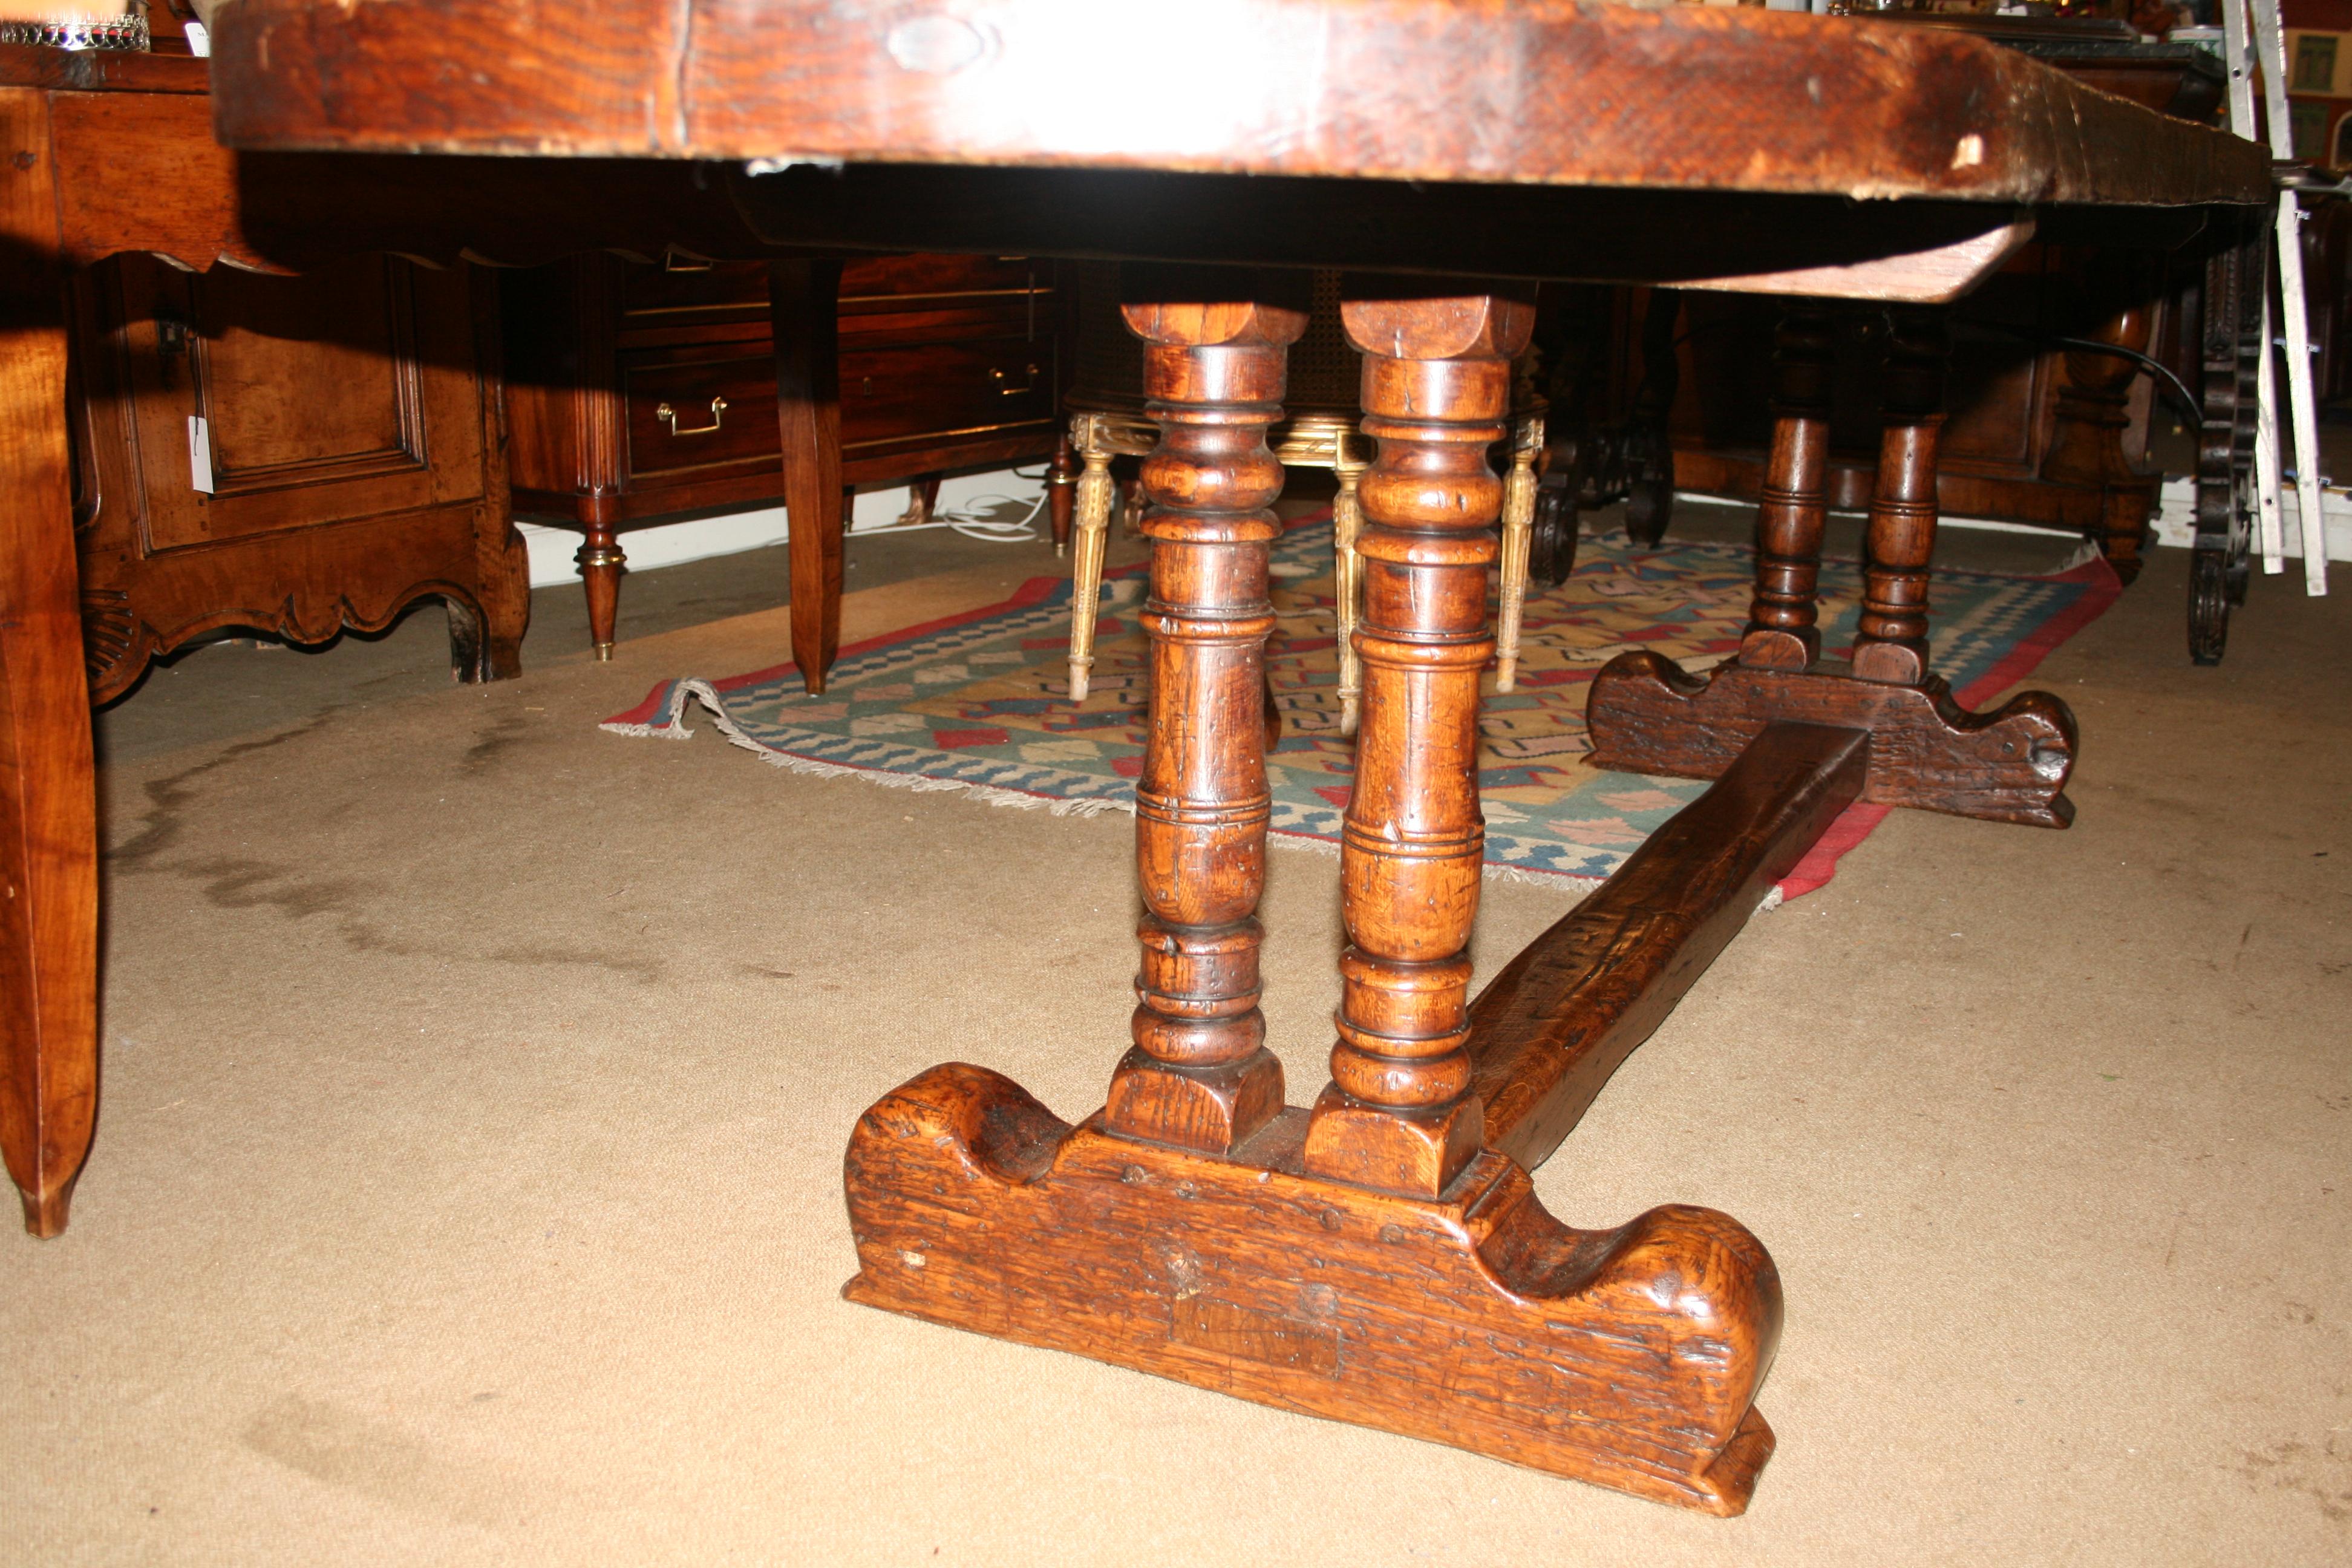 Superb oak table with top being one piece of timber with very good color and patina, base form of twin columns and stretcher in 17th century style.